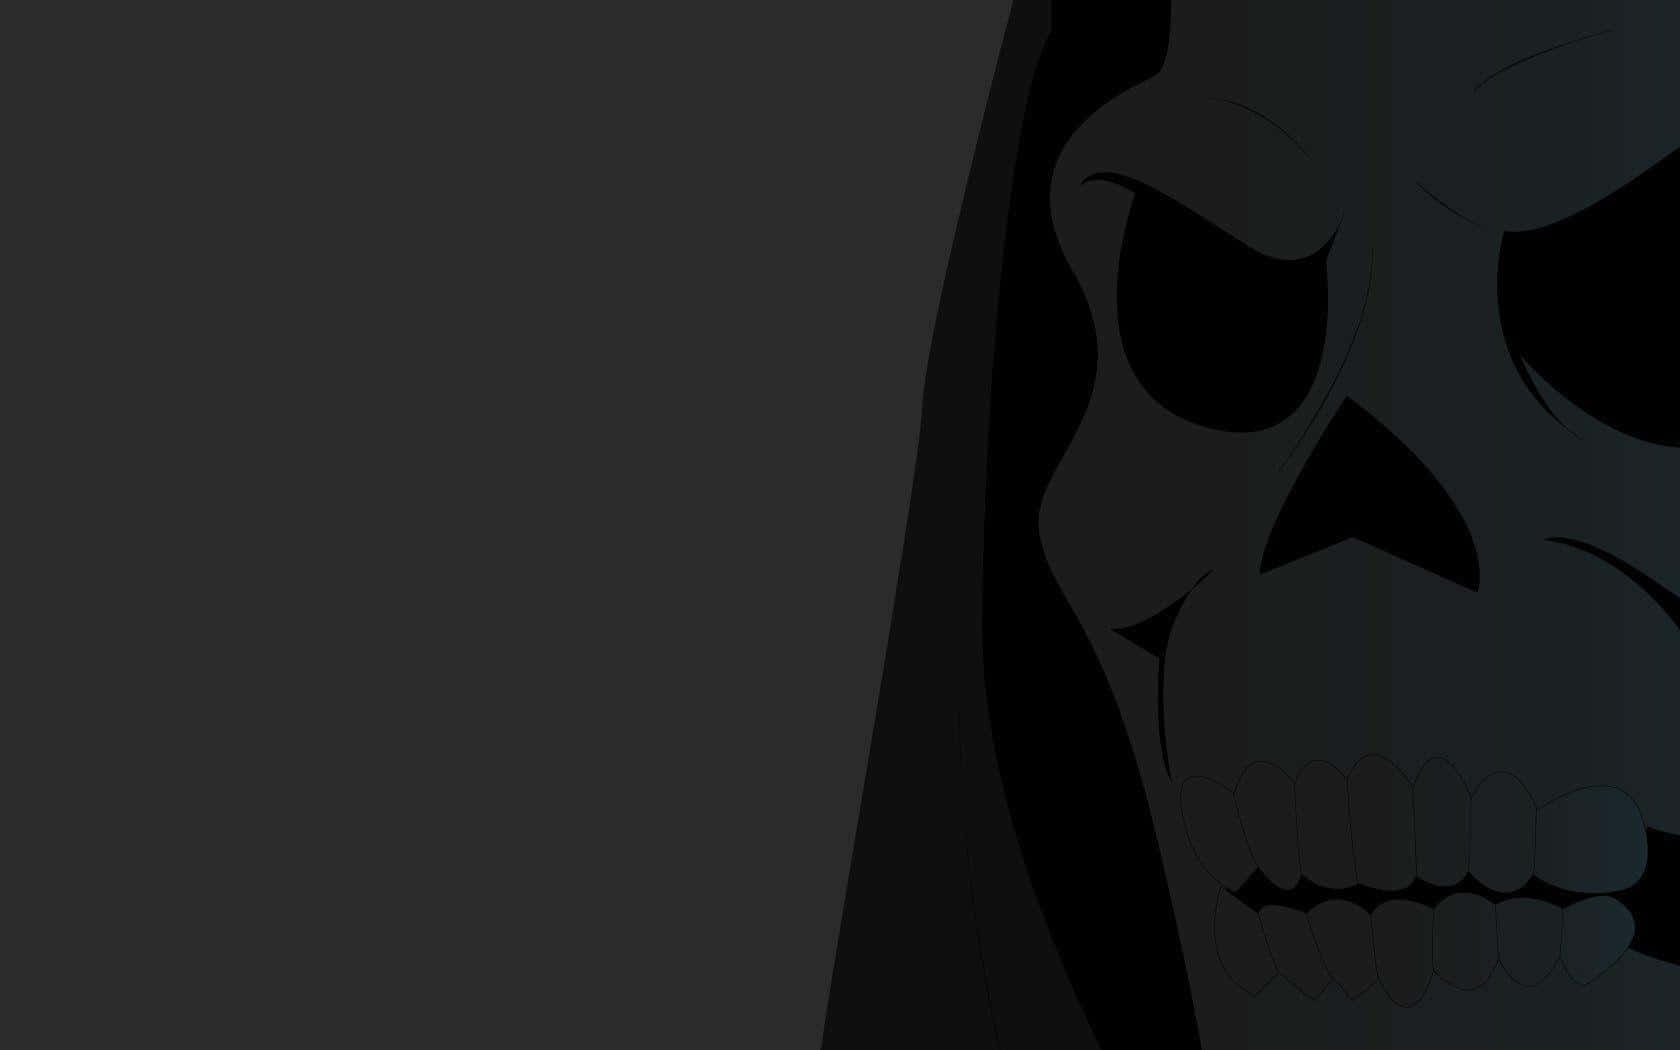 A Skull With A Hood Is Shown On A Black Background Wallpaper